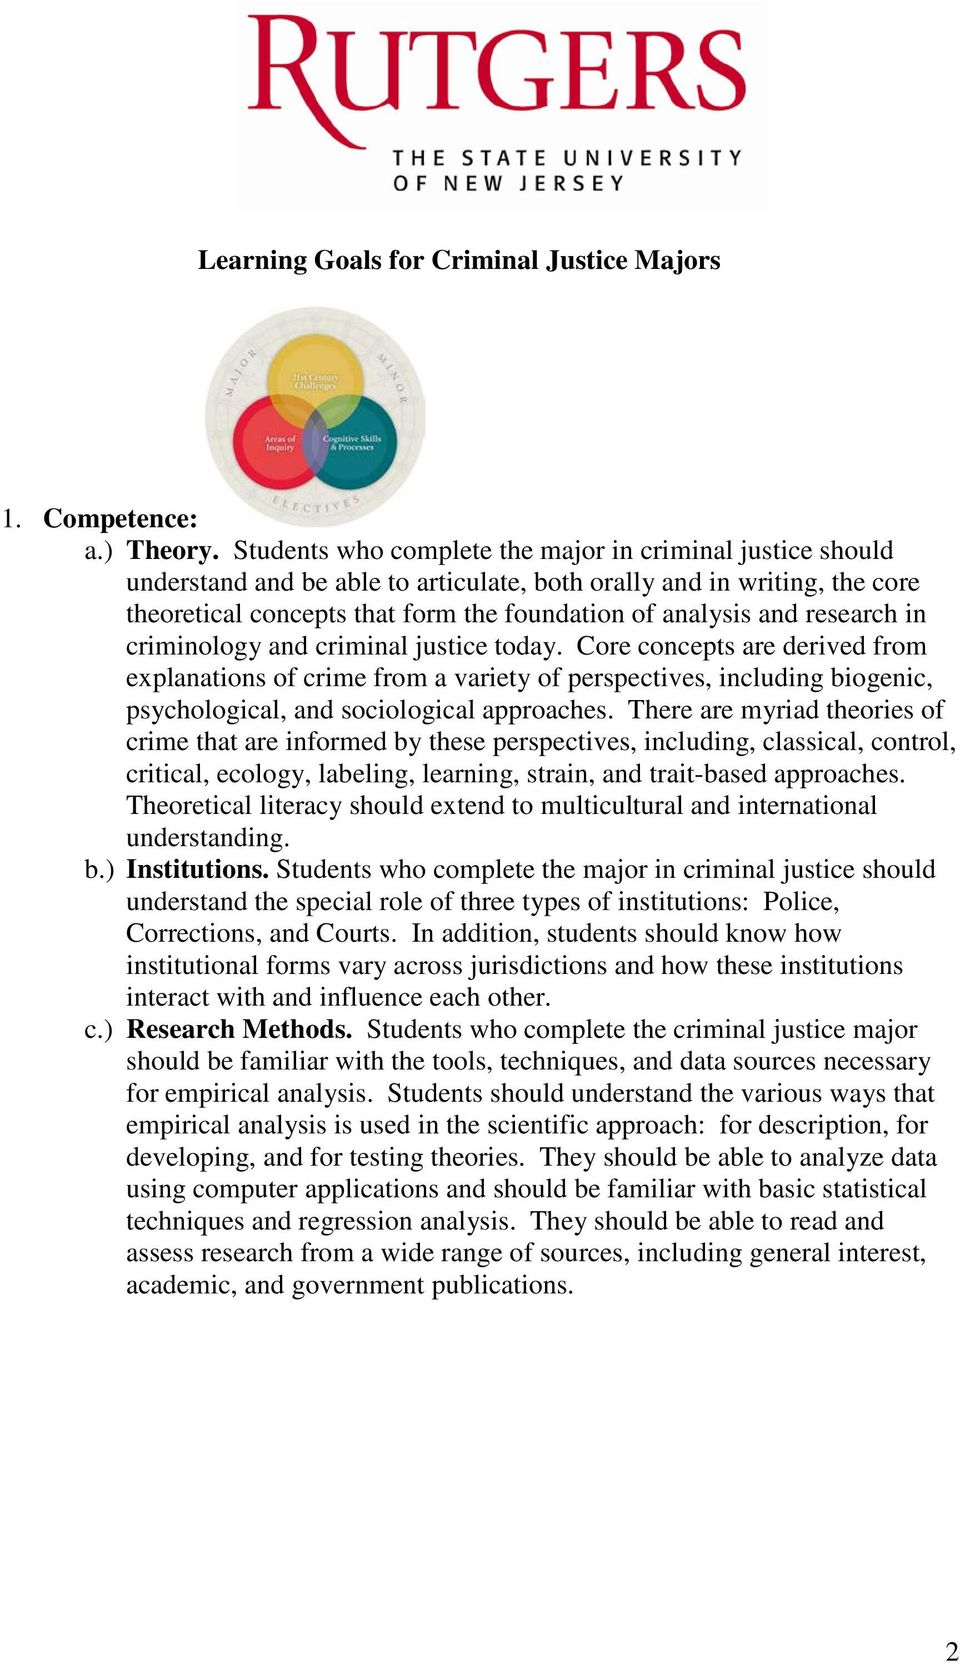 research in criminology and criminal justice today. Core concepts are derived from explanations of crime from a variety of perspectives, including biogenic, psychological, and sociological approaches.